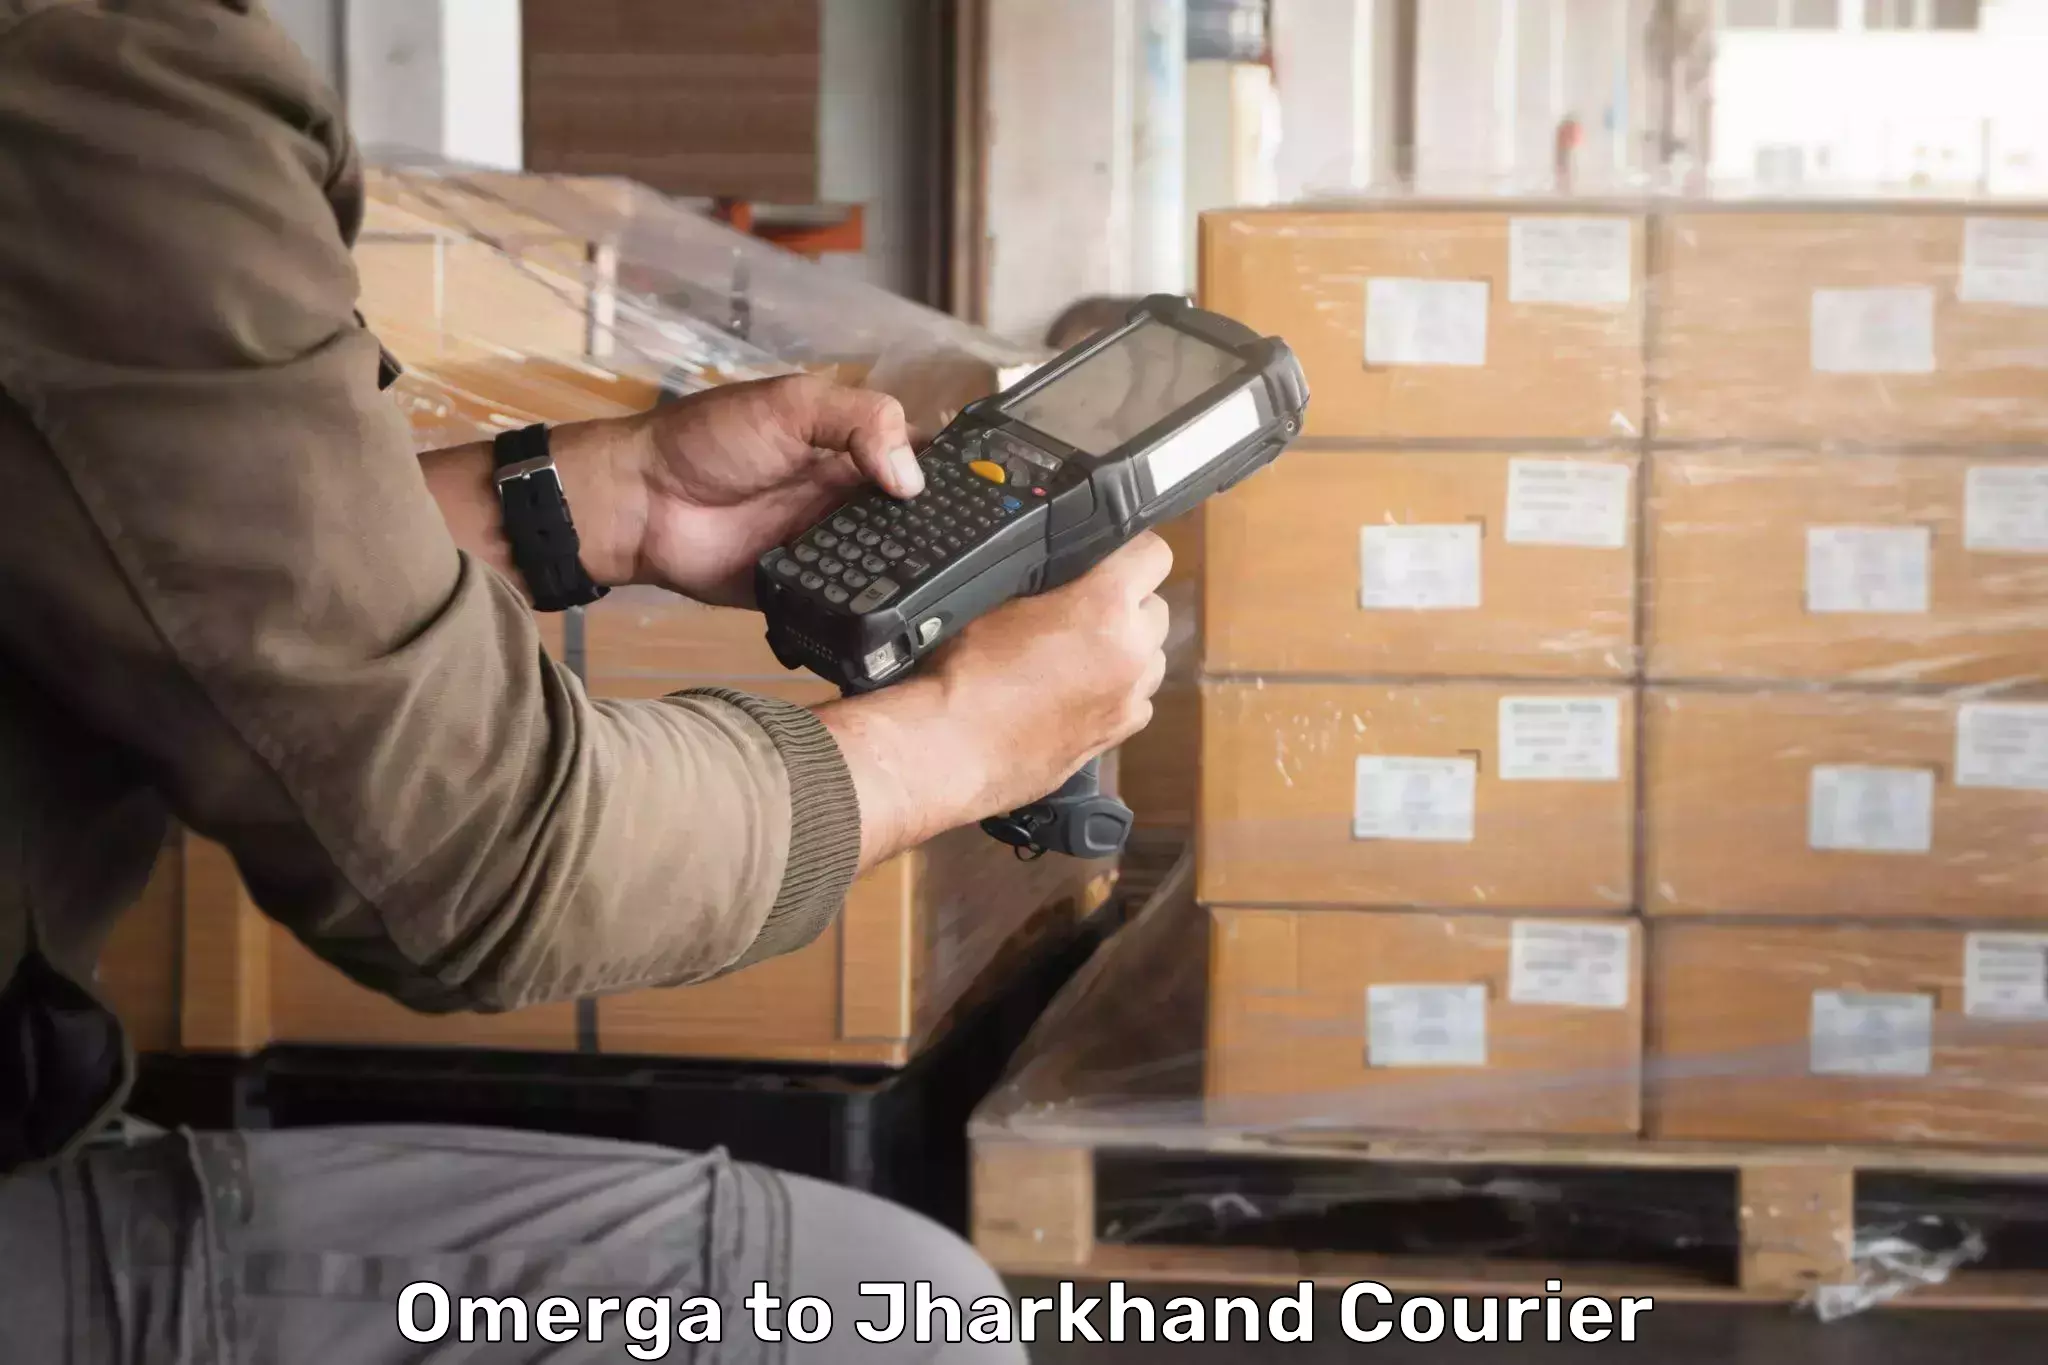 Parcel service for businesses Omerga to Bero Ranchi